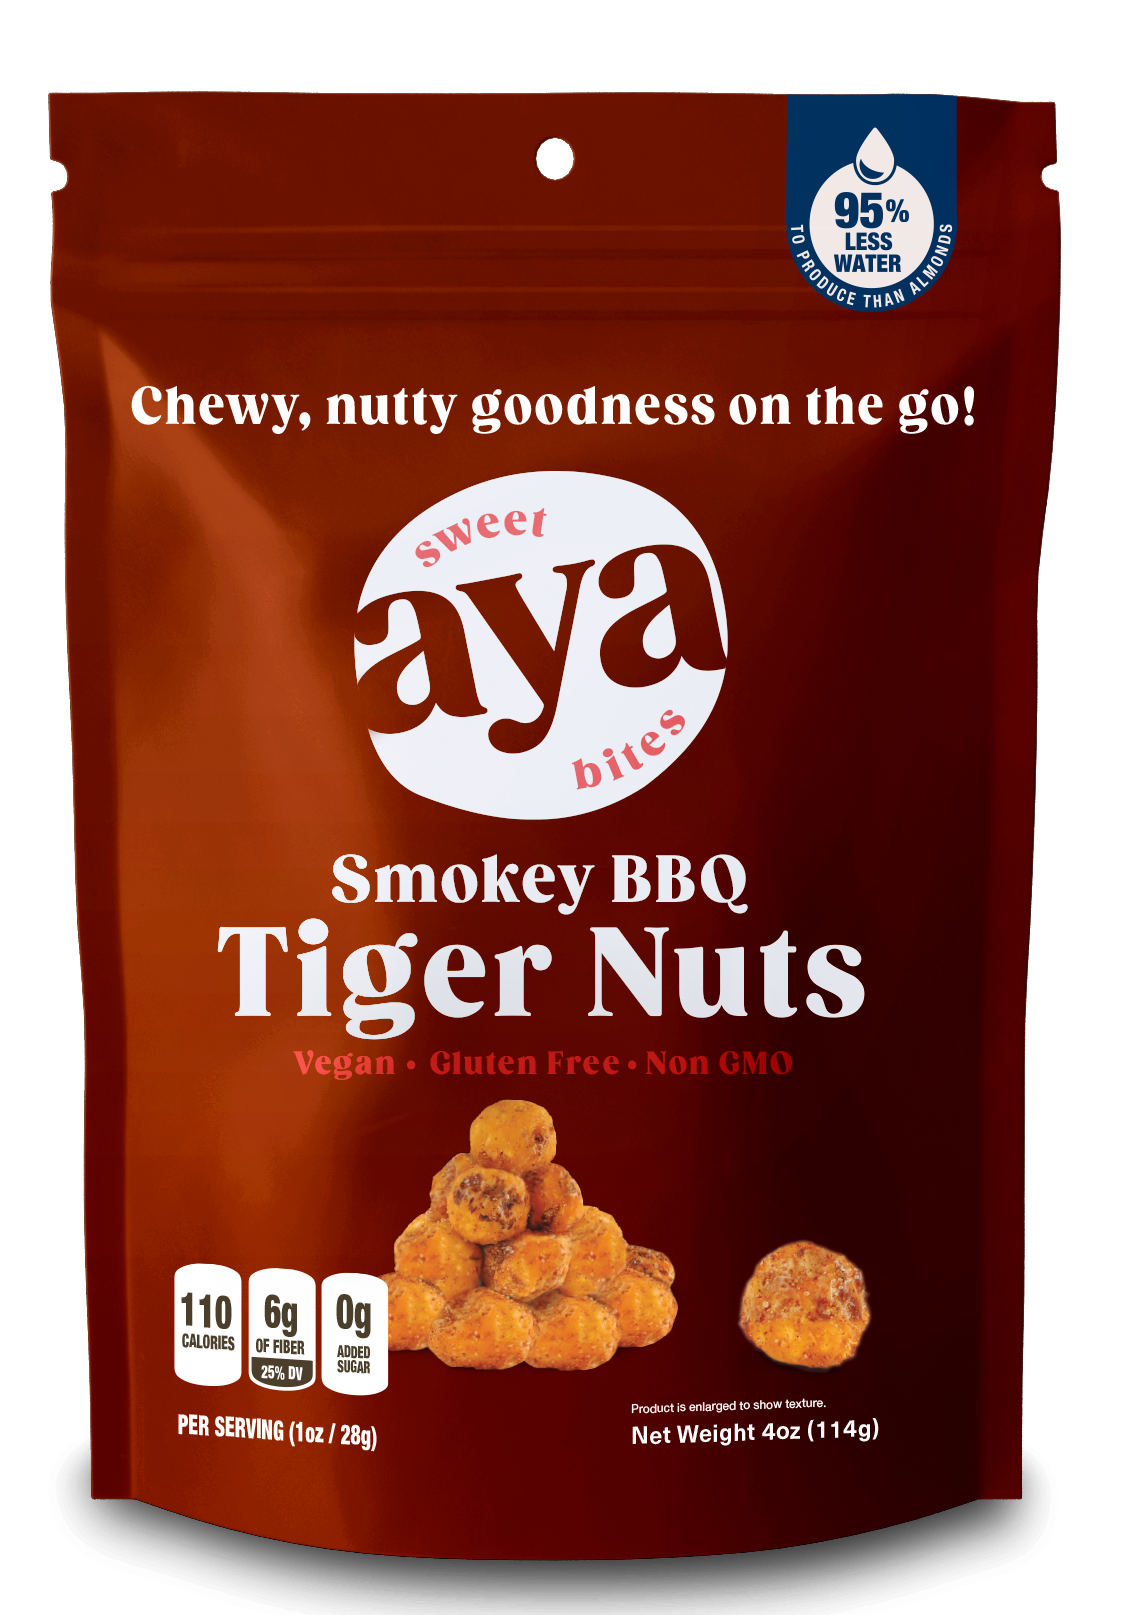 Smokey BBQ barbecue flavored sweet aya bites tiger nuts healthy, low-calorie, low-fat snack food